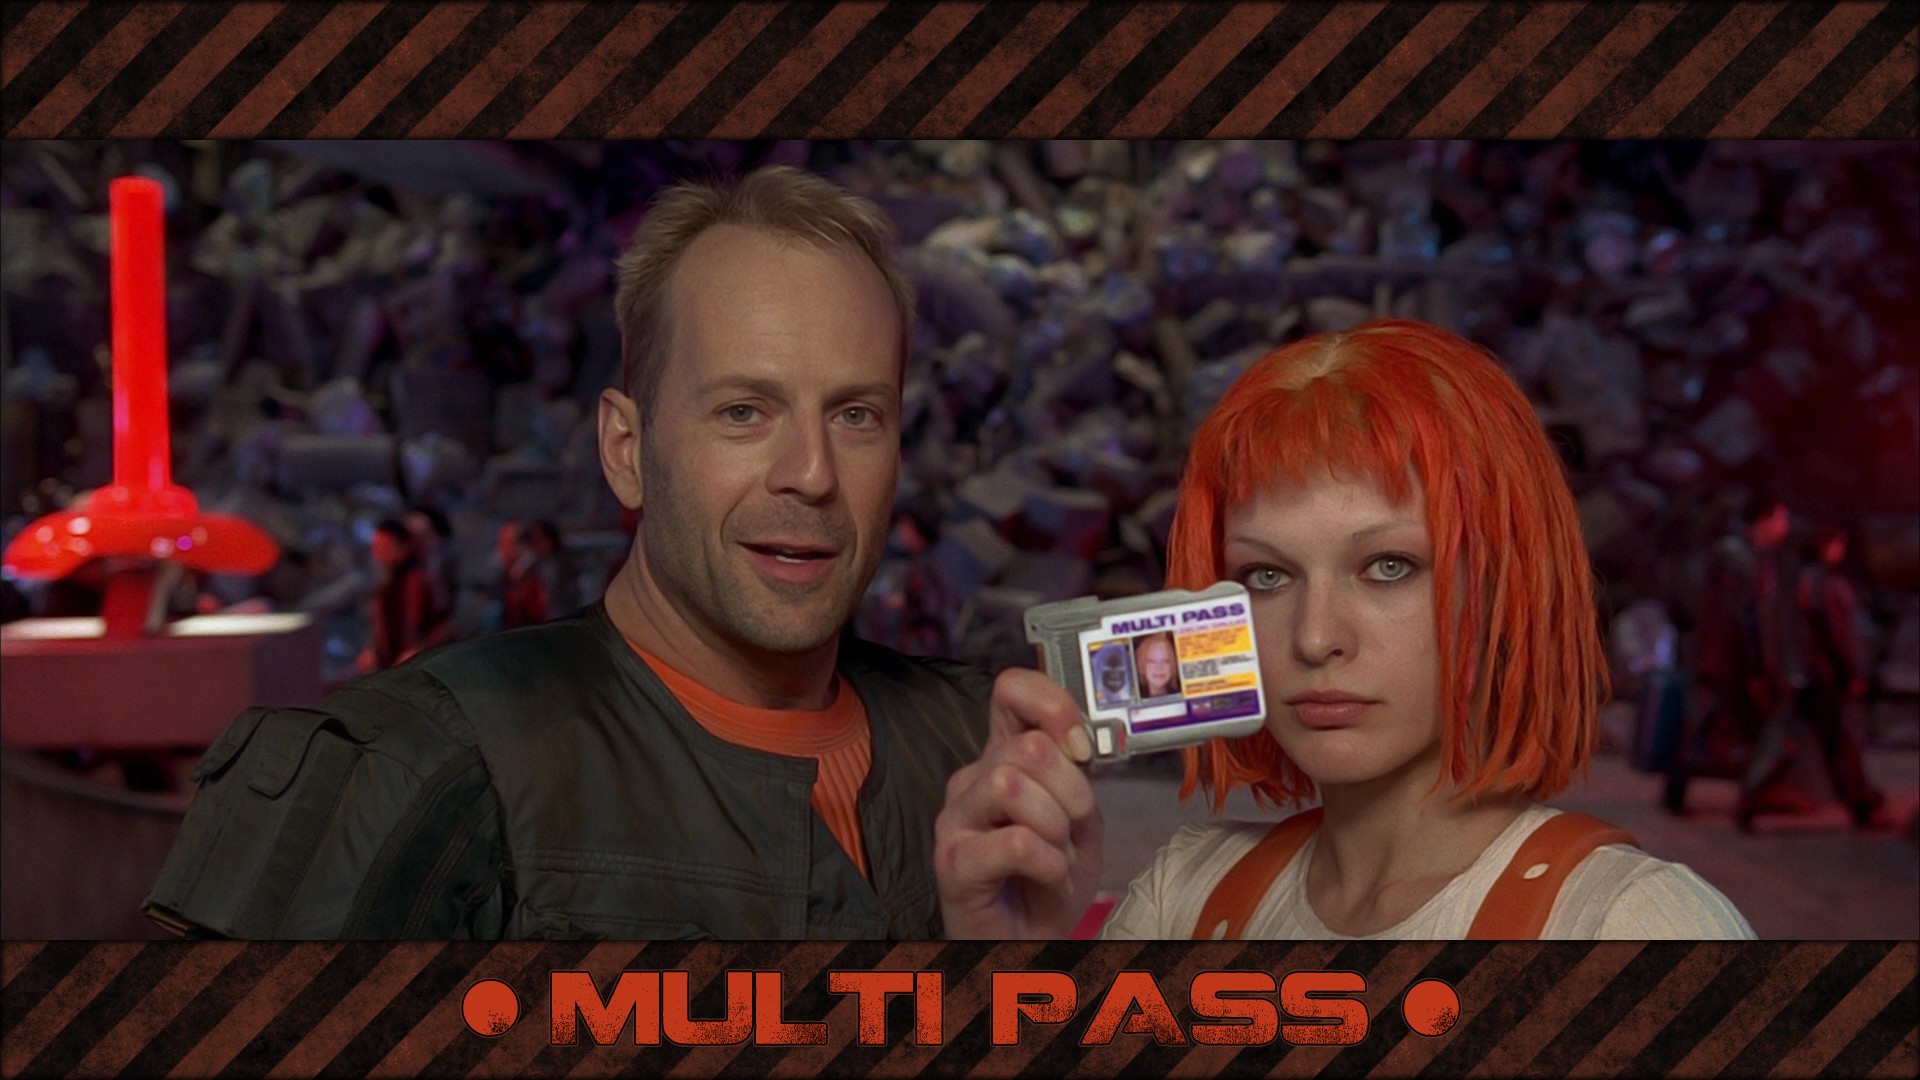 Movies The Fifth Element Milla Jovovich Leeloo Bruce Willis Smiling Luc Besson 1920x1080